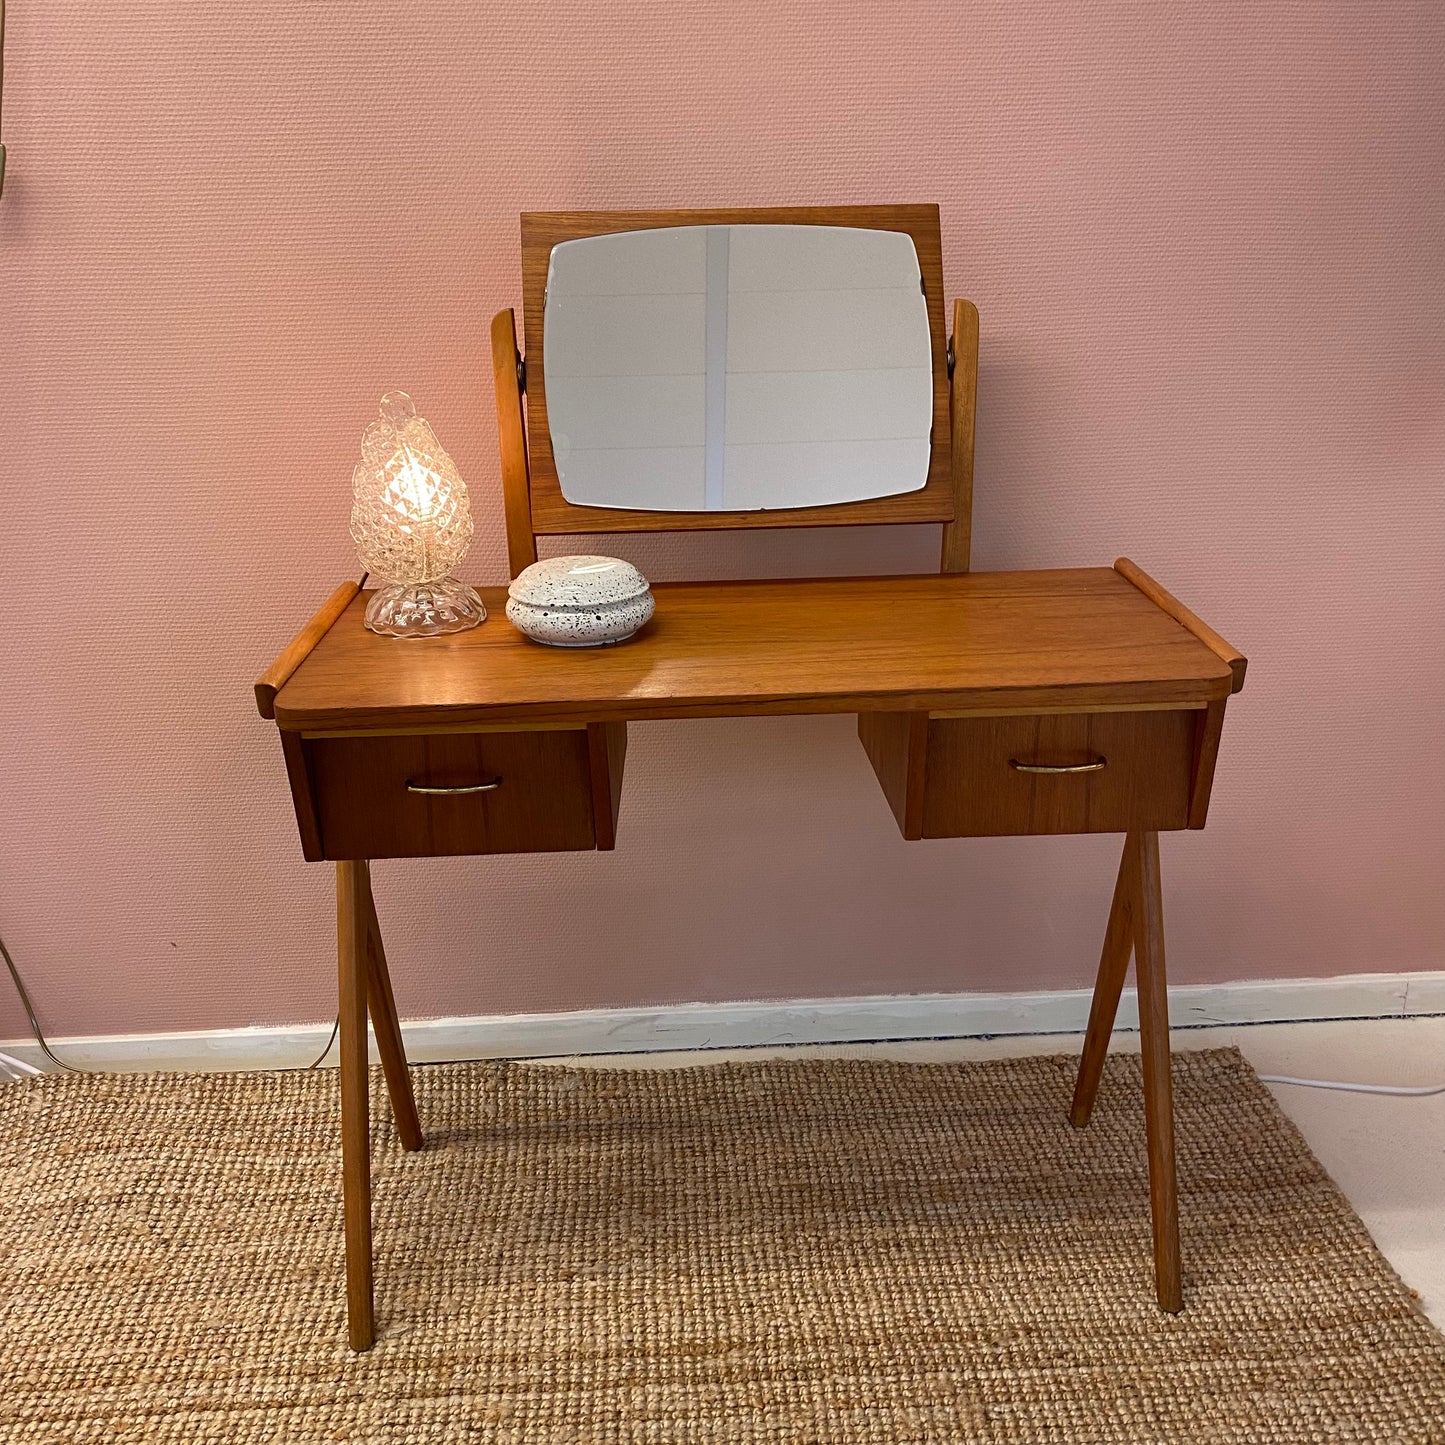 Classic swedish dressing table / vanity with mirror